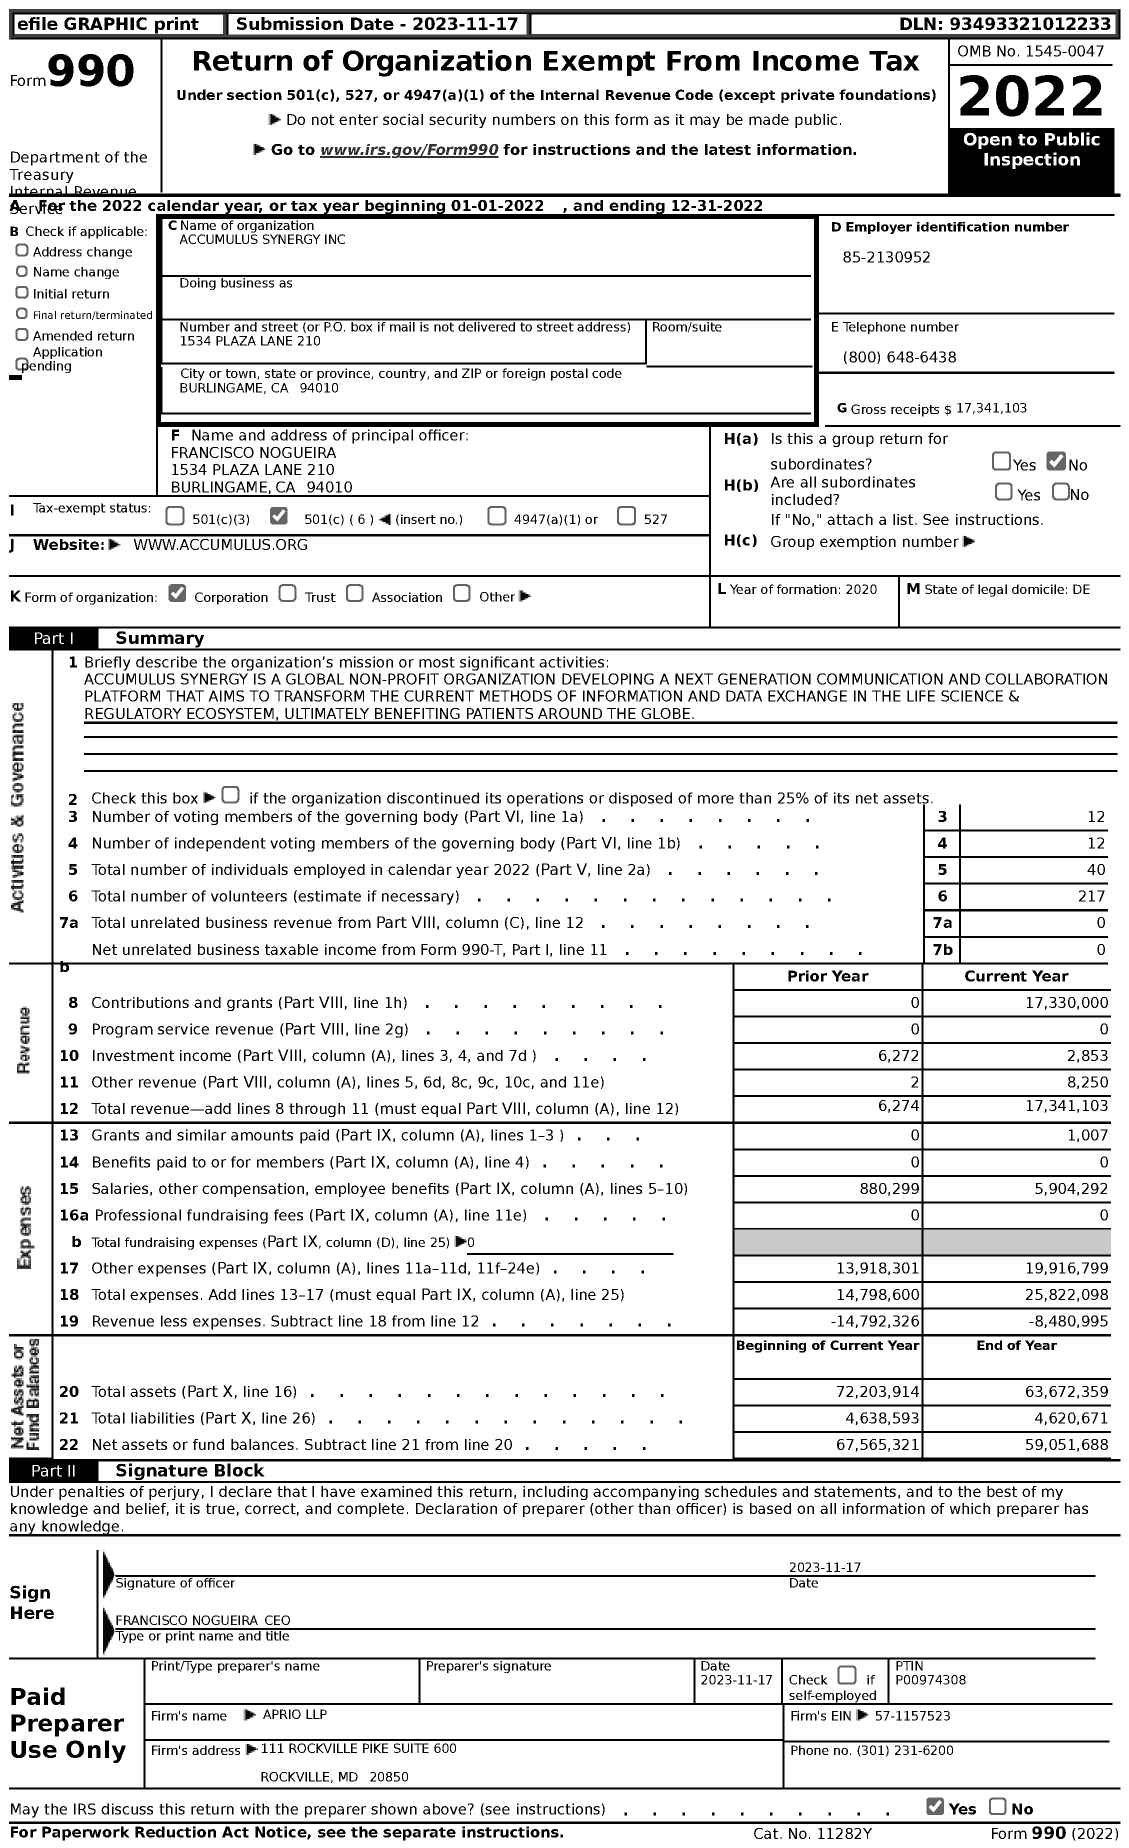 Image of first page of 2022 Form 990 for Accumulus Synergy